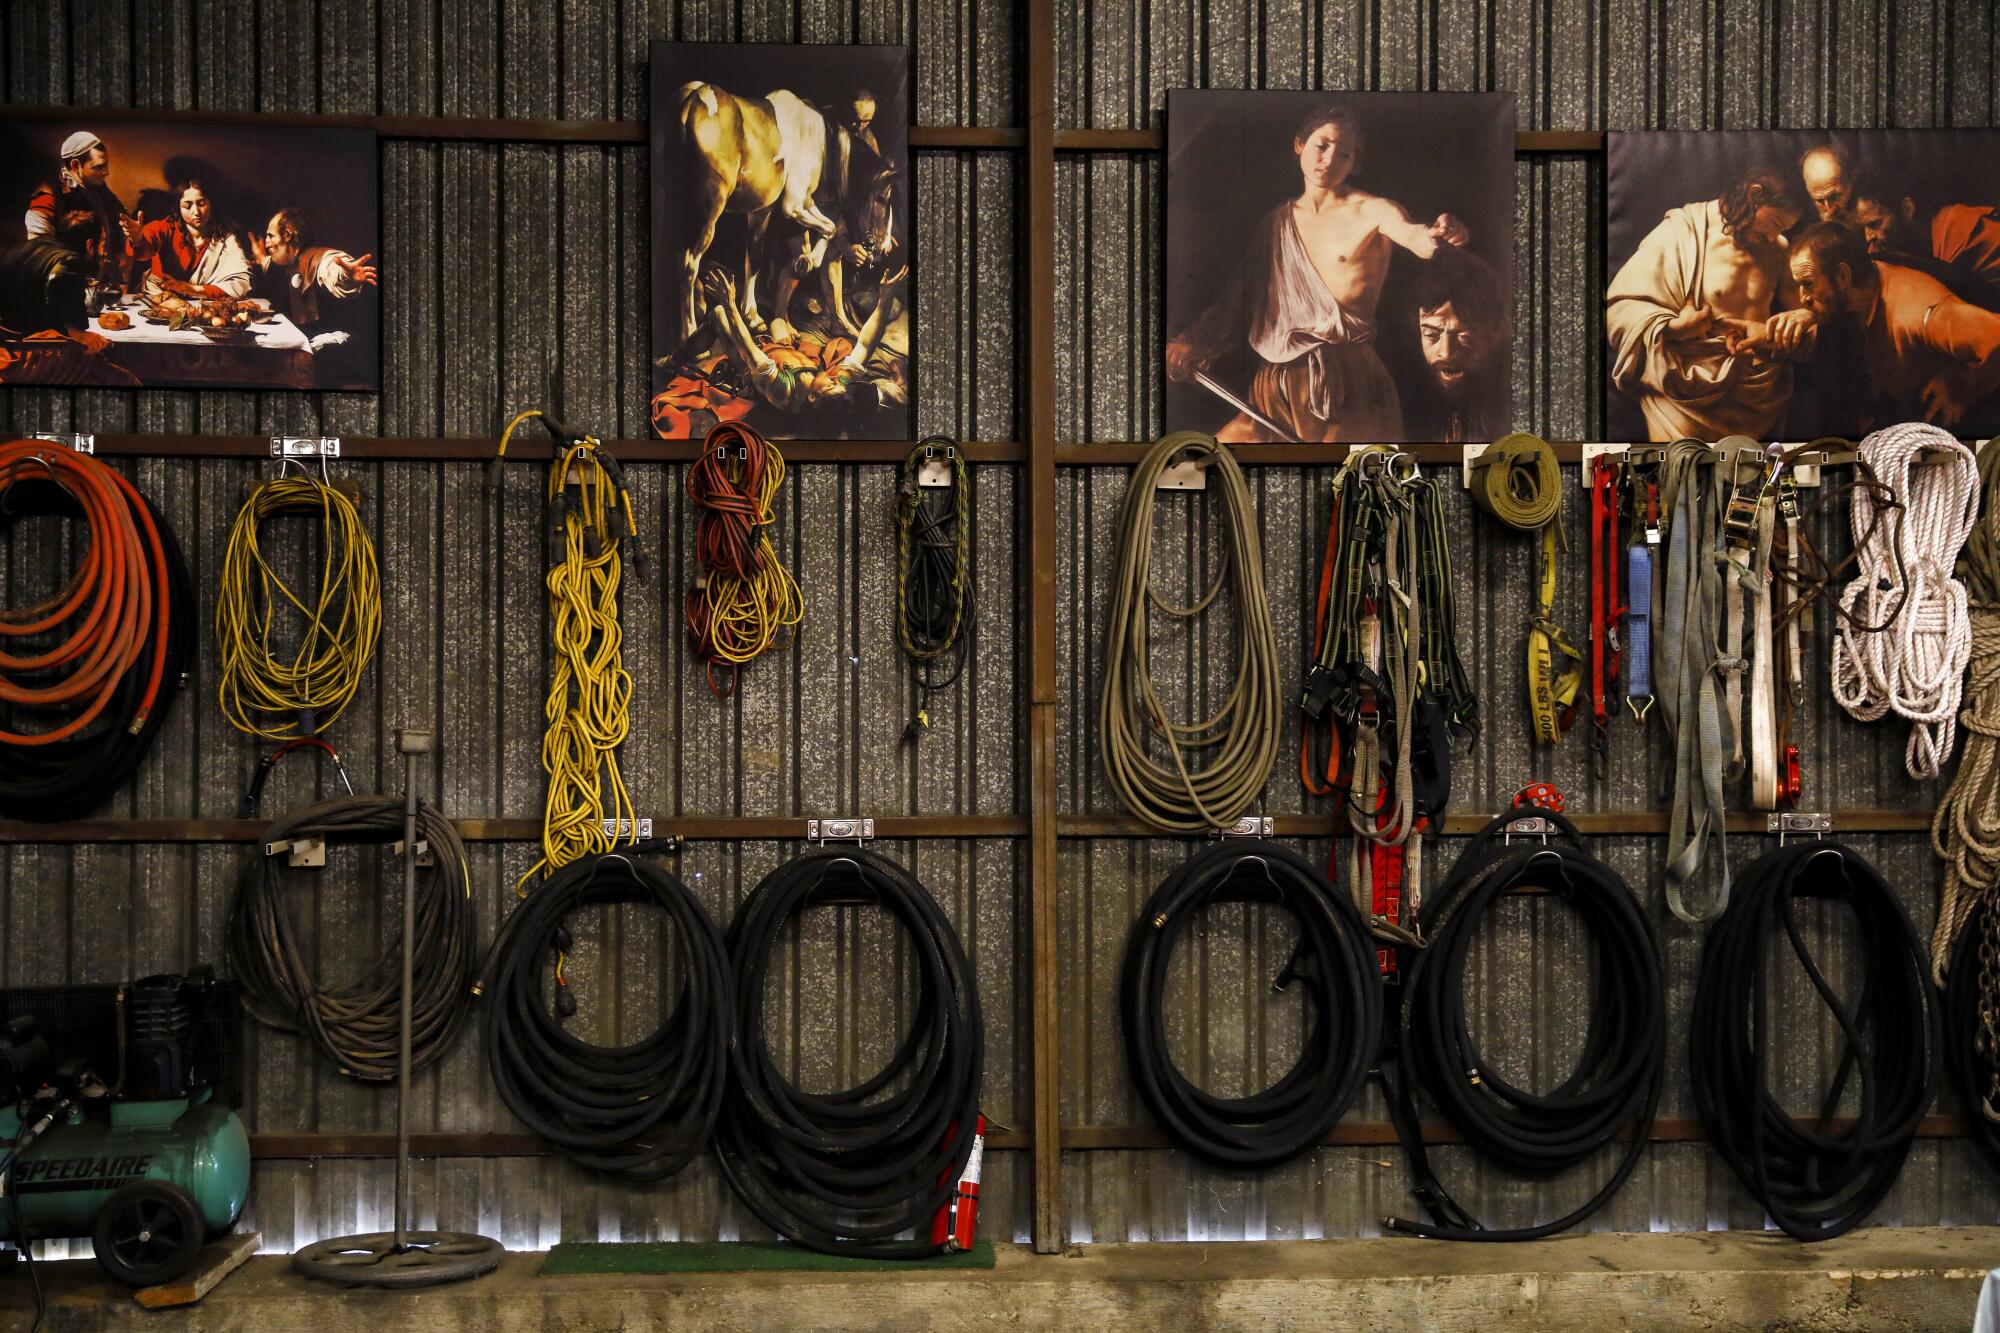 Replicas of paintings by Renaissance artist Caravaggio line the landscaping shop walls above neatly coiled hoses and ropes.